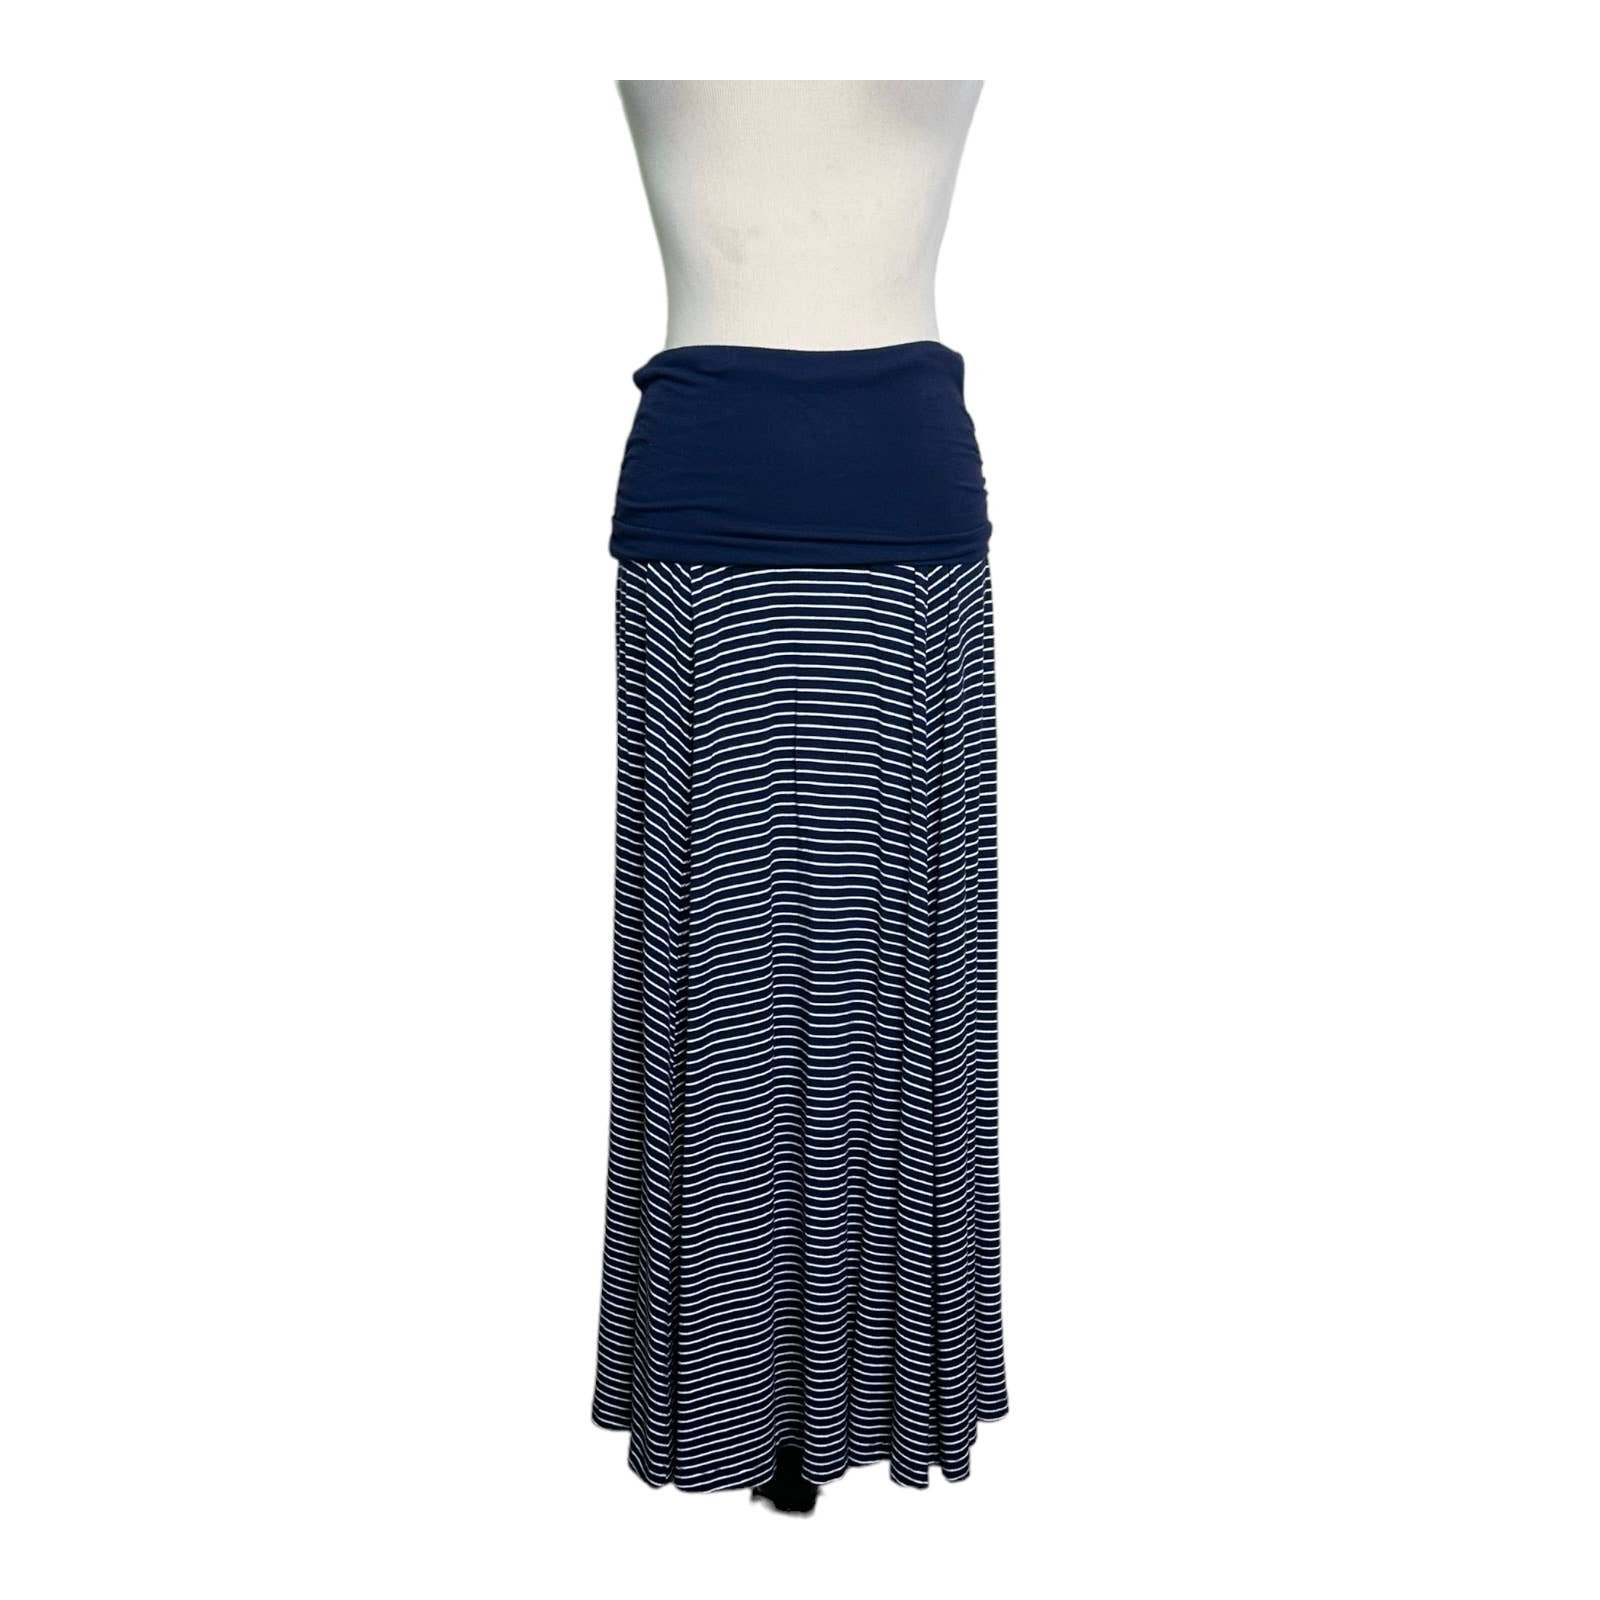 reasonable price Gap blue striped pull on maxi skirt size XS LOxyOW32g Factory Price